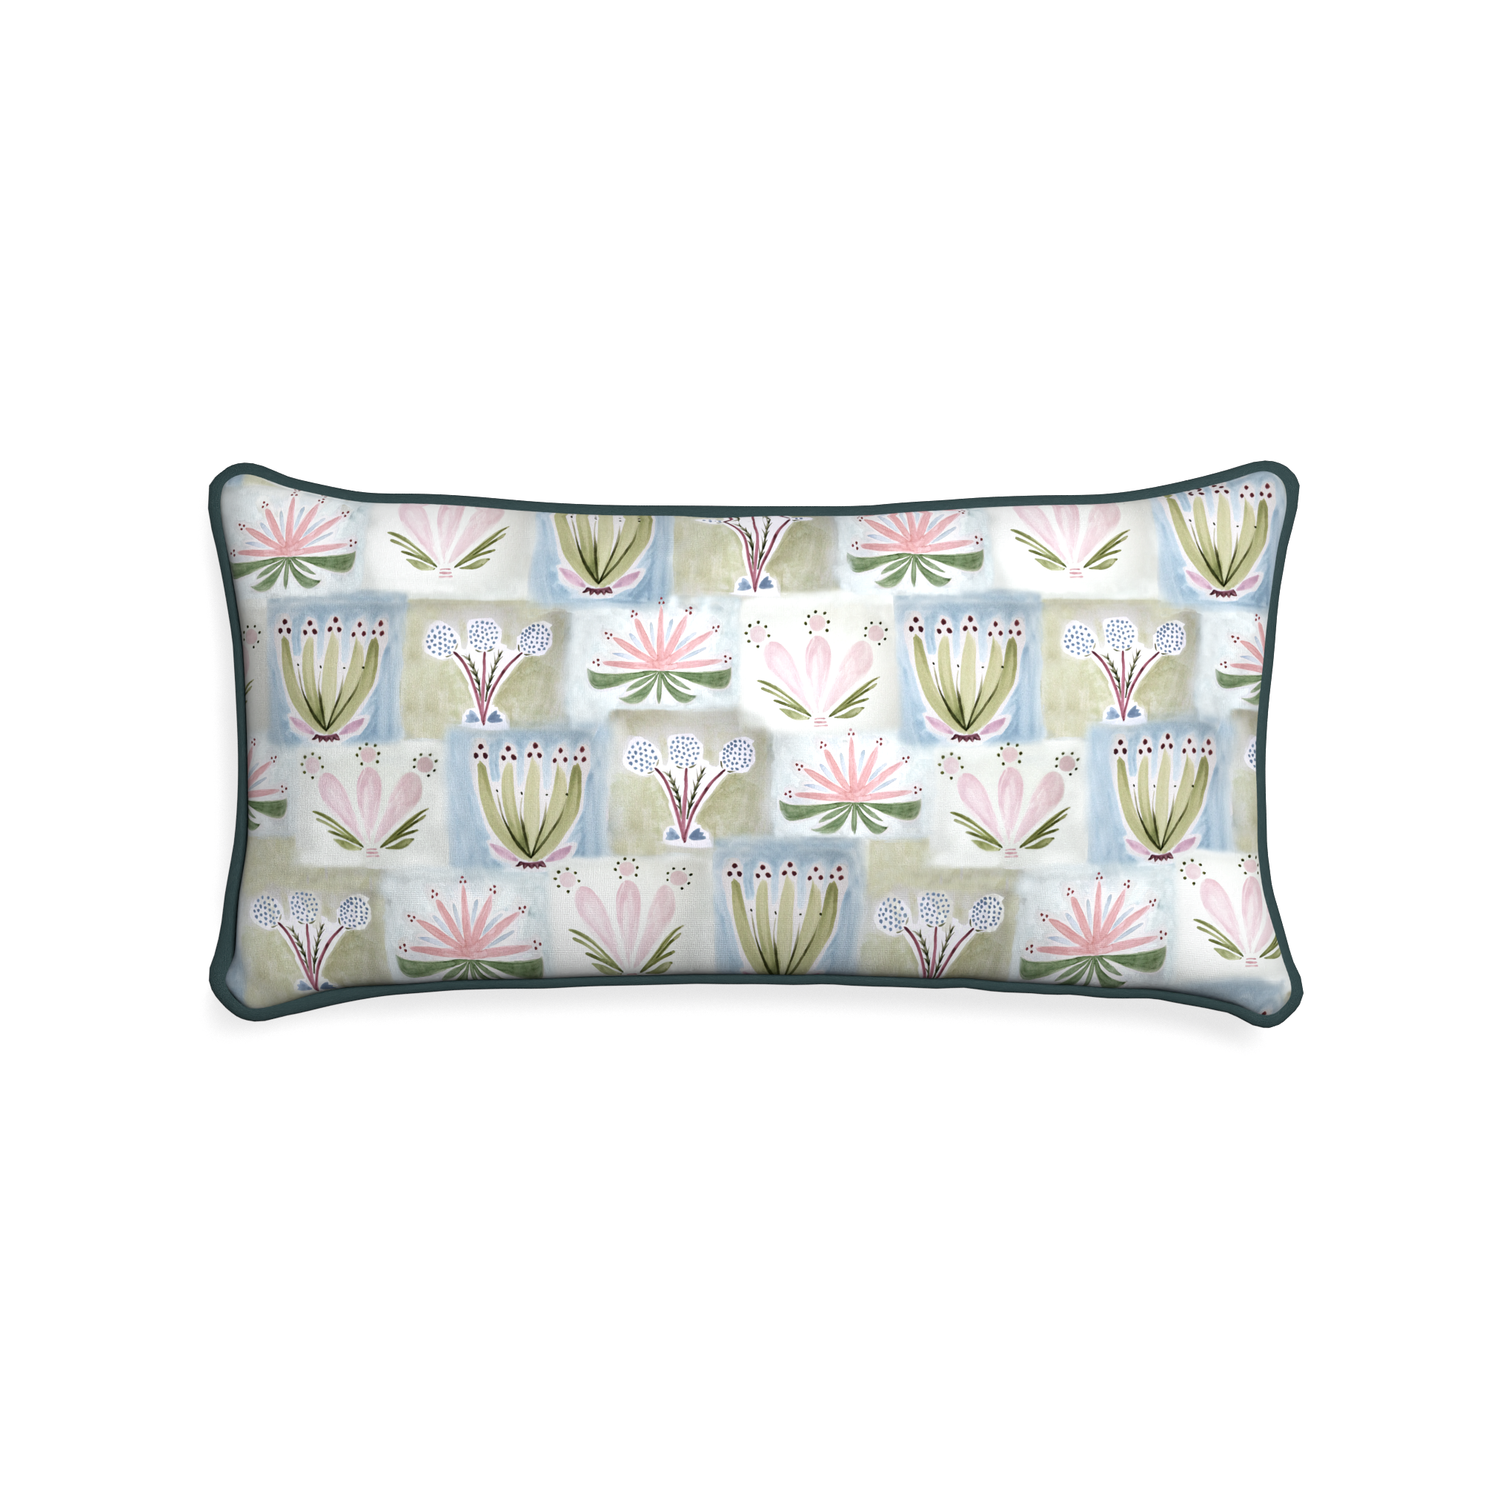 Midi-lumbar harper custom hand-painted floralpillow with p piping on white background